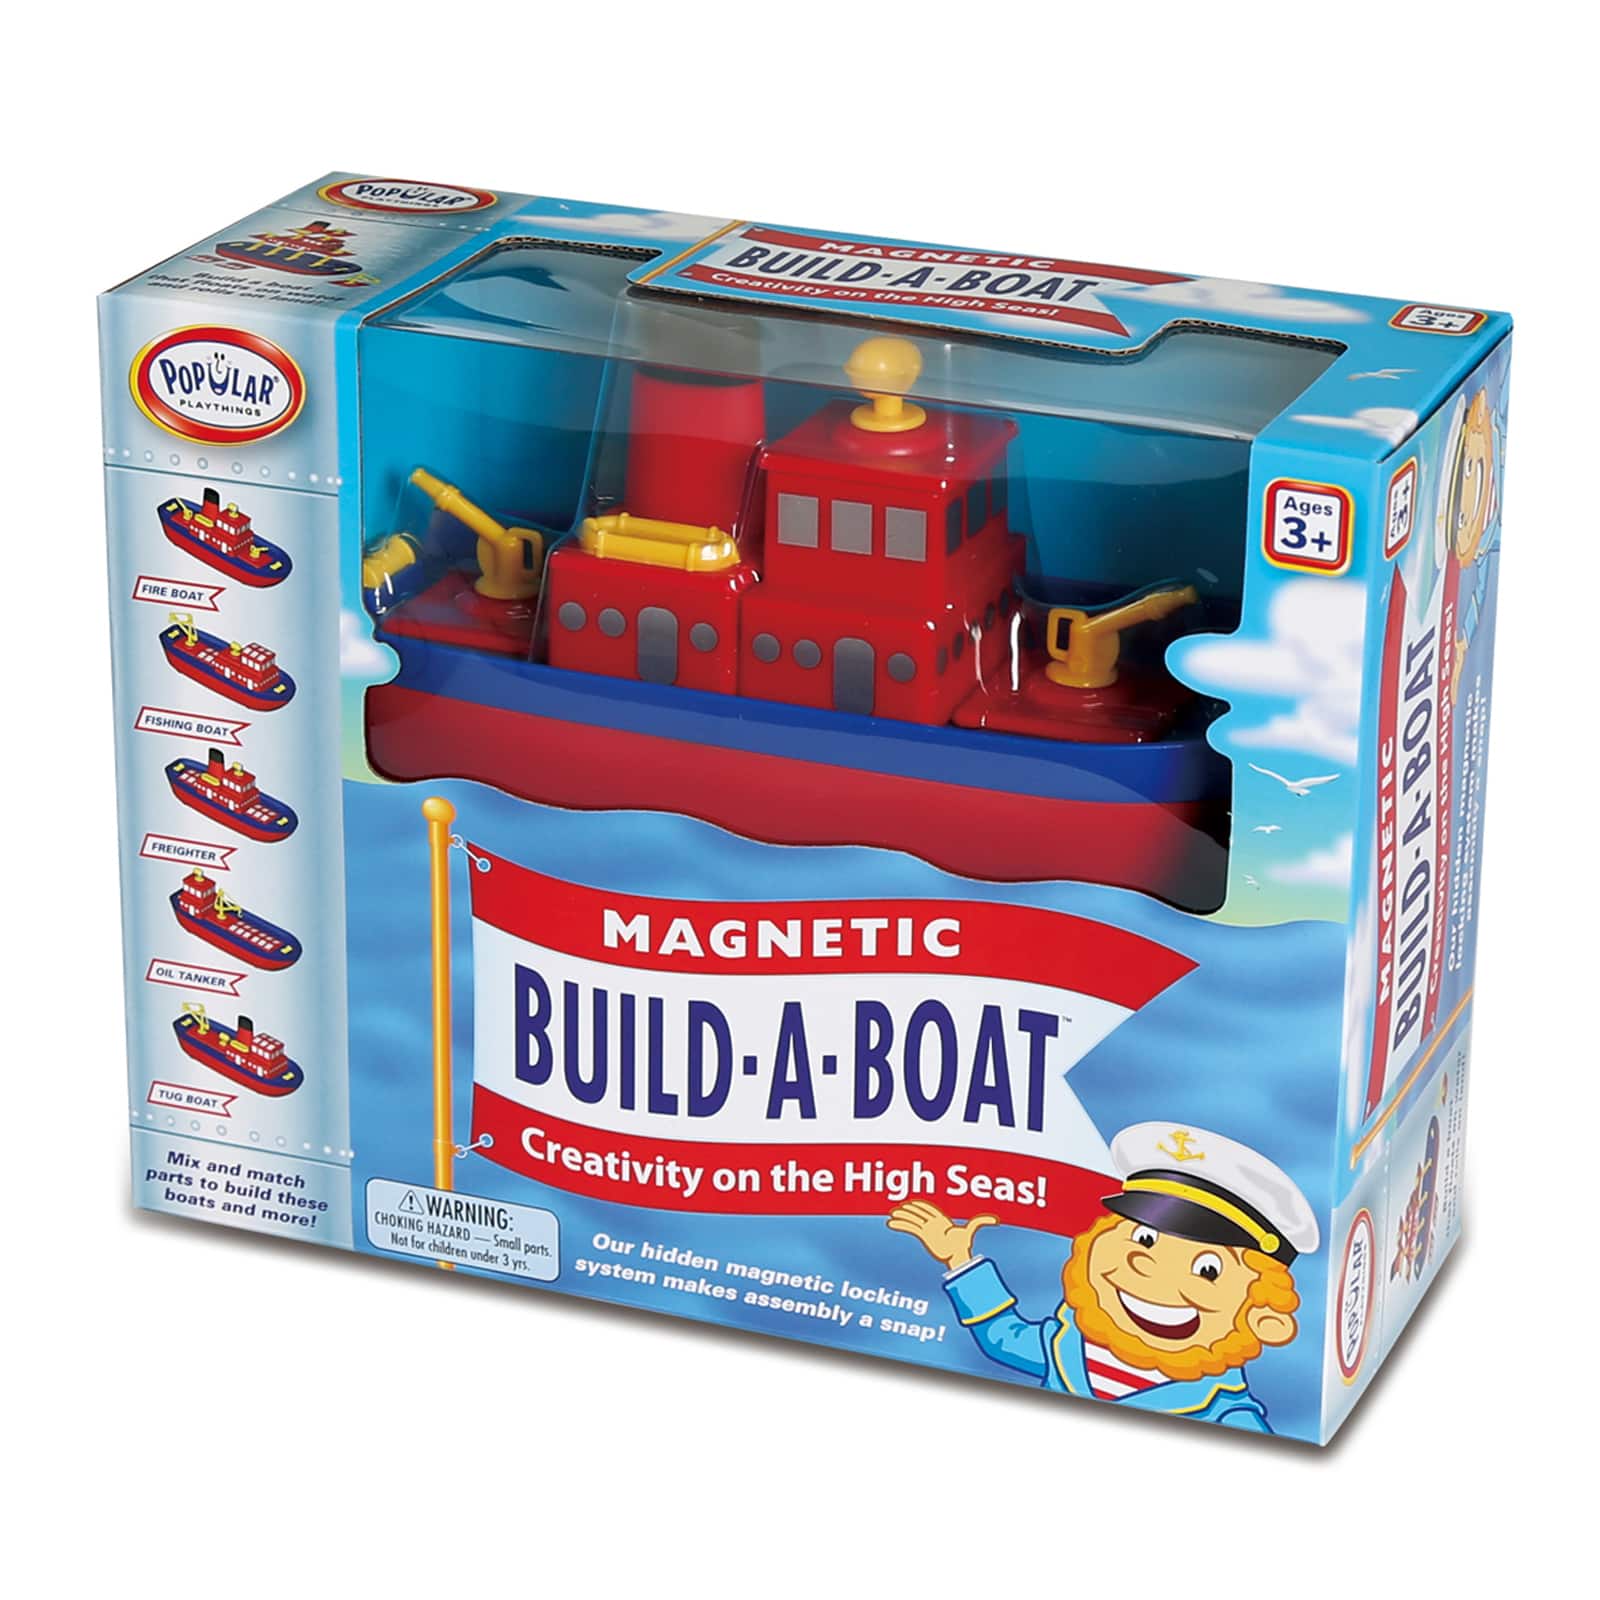 Popular Playthings® Magnetic Build-a-Boat™